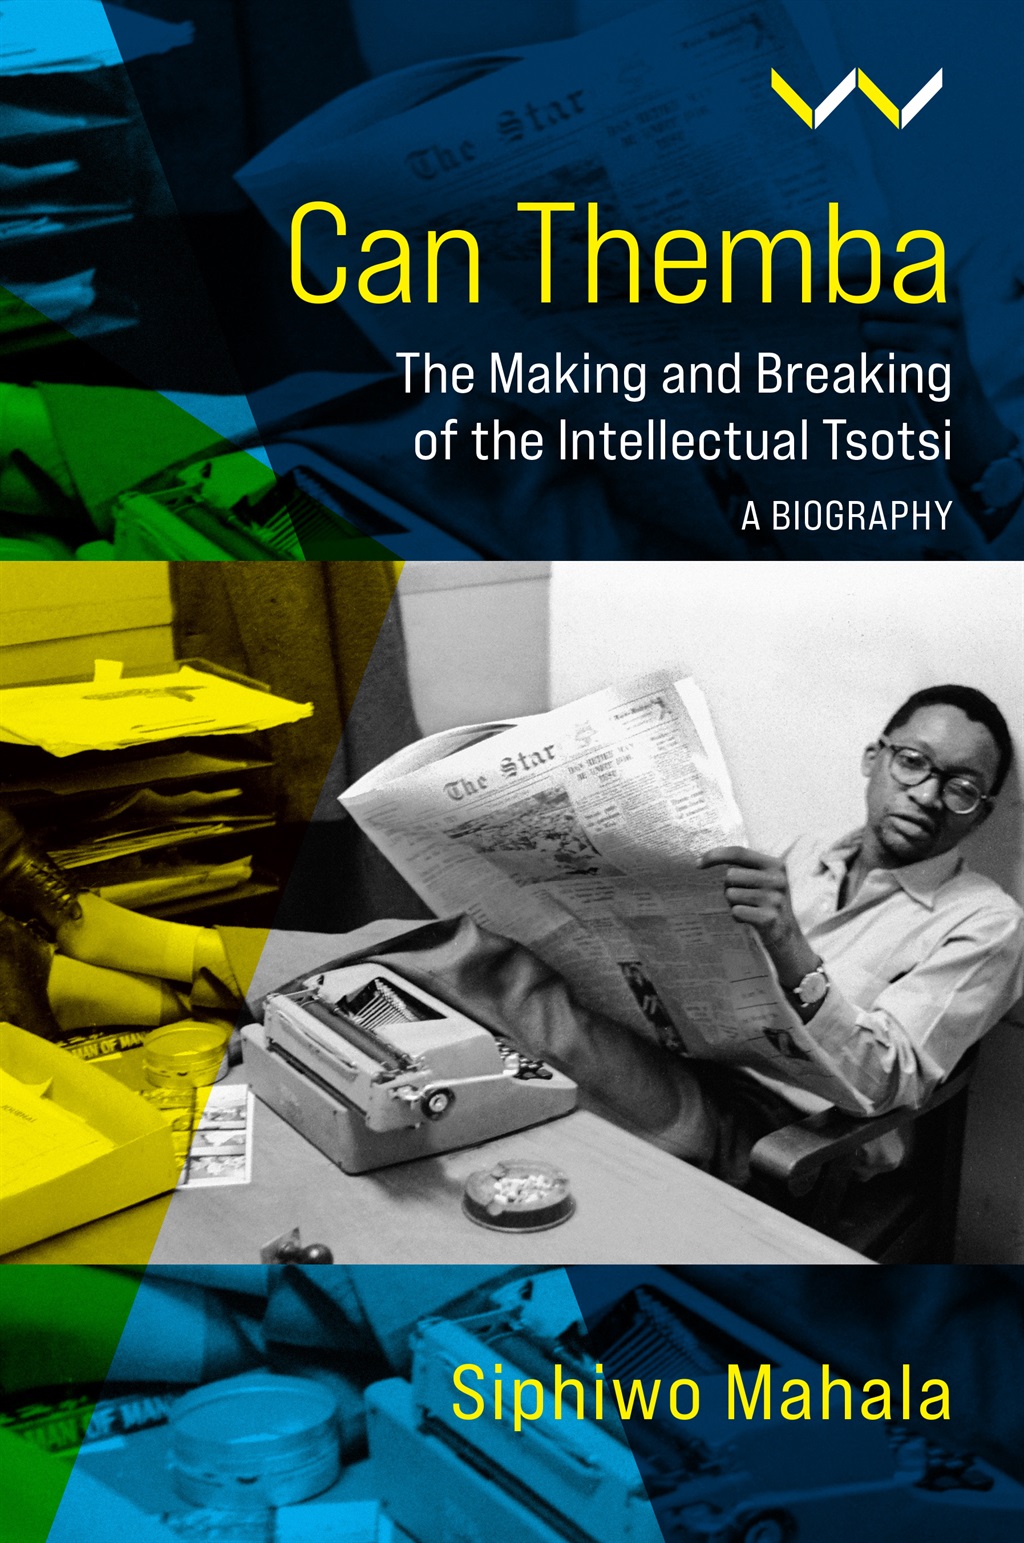 Can Themba: The Making and Breaking of the Intellectual Tsotsi by Siphiwo Mahala (Witwatersrand University Press)